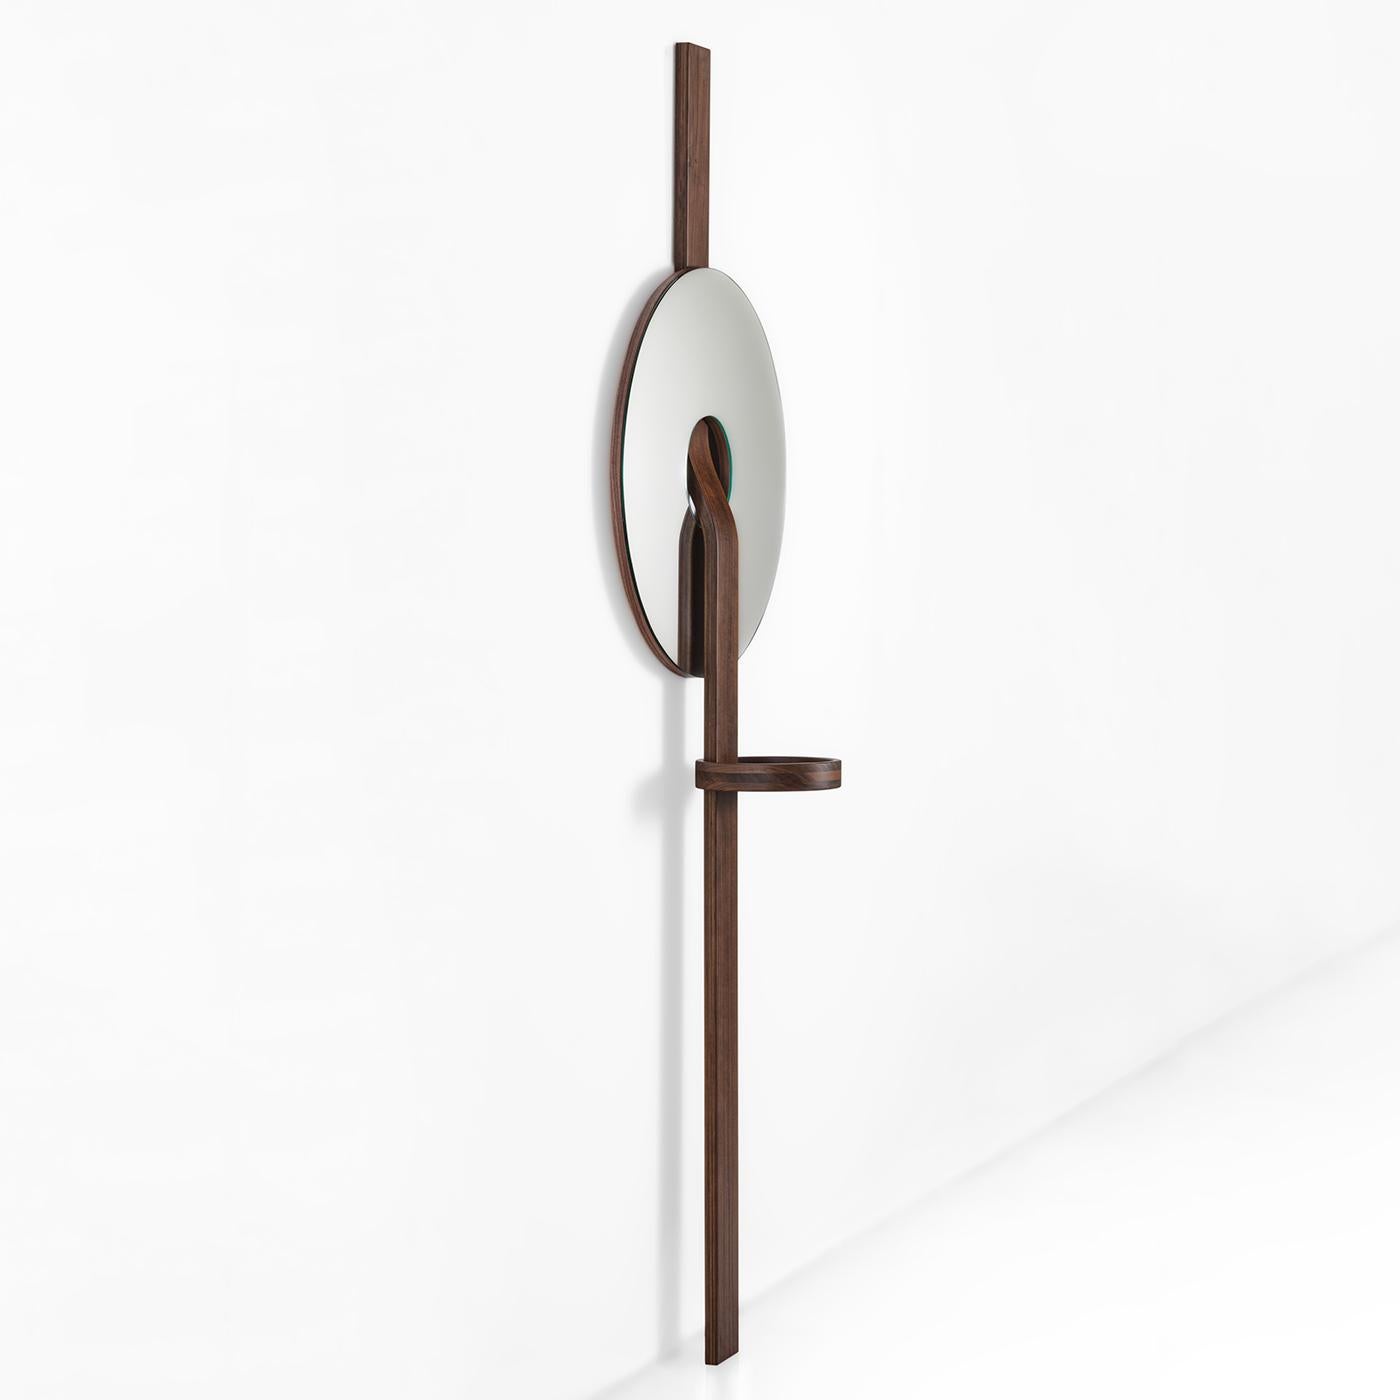 This wall mirror is a triumph of geometric volumes arranged in a sculptural composition of unmistakable contemporary inspiration. The disk-shaped mirrored glass element is pierced by the slightly curved band in solid Canaletto walnut that serves an